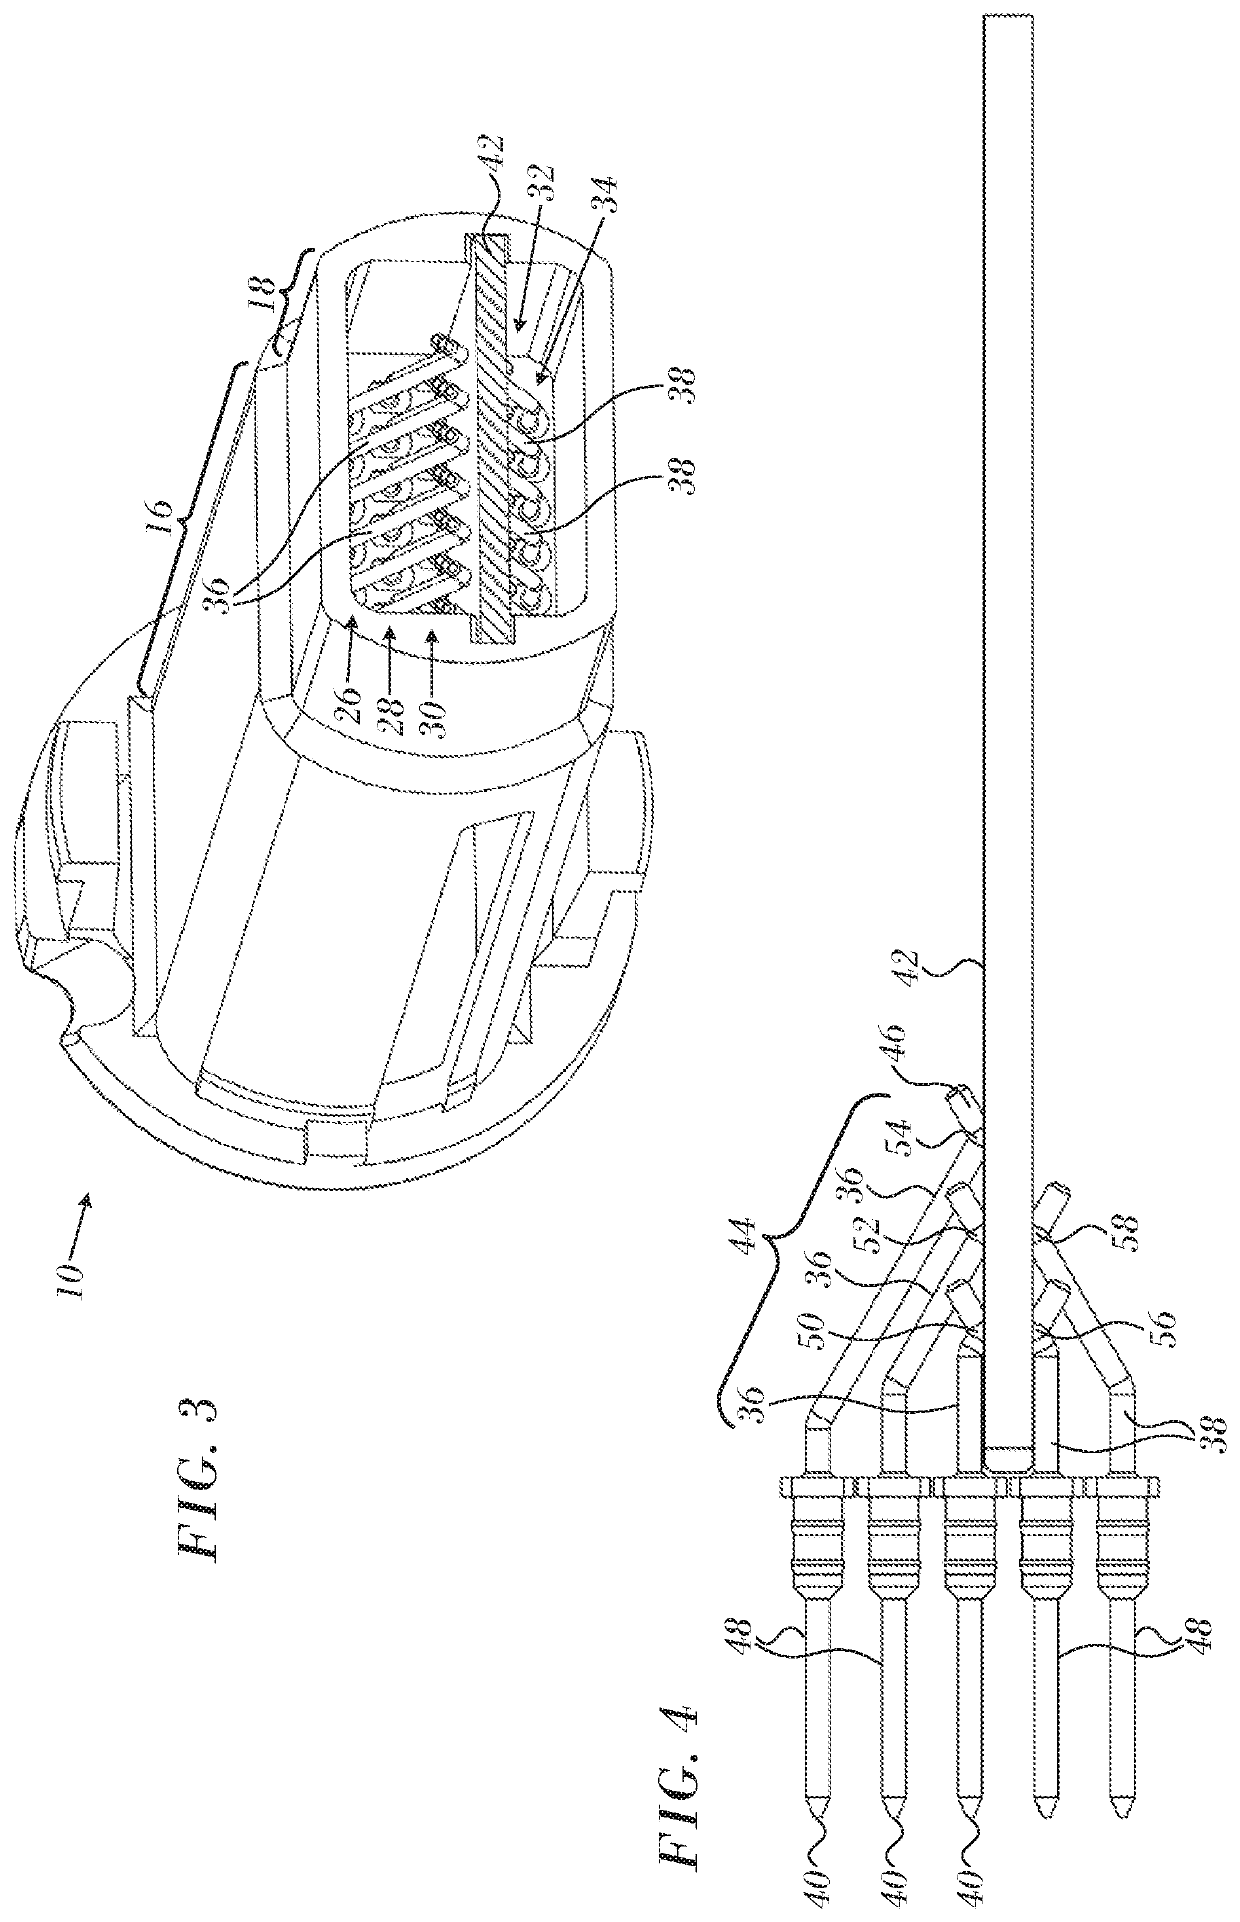 Edge card adapter and electrical coupling device